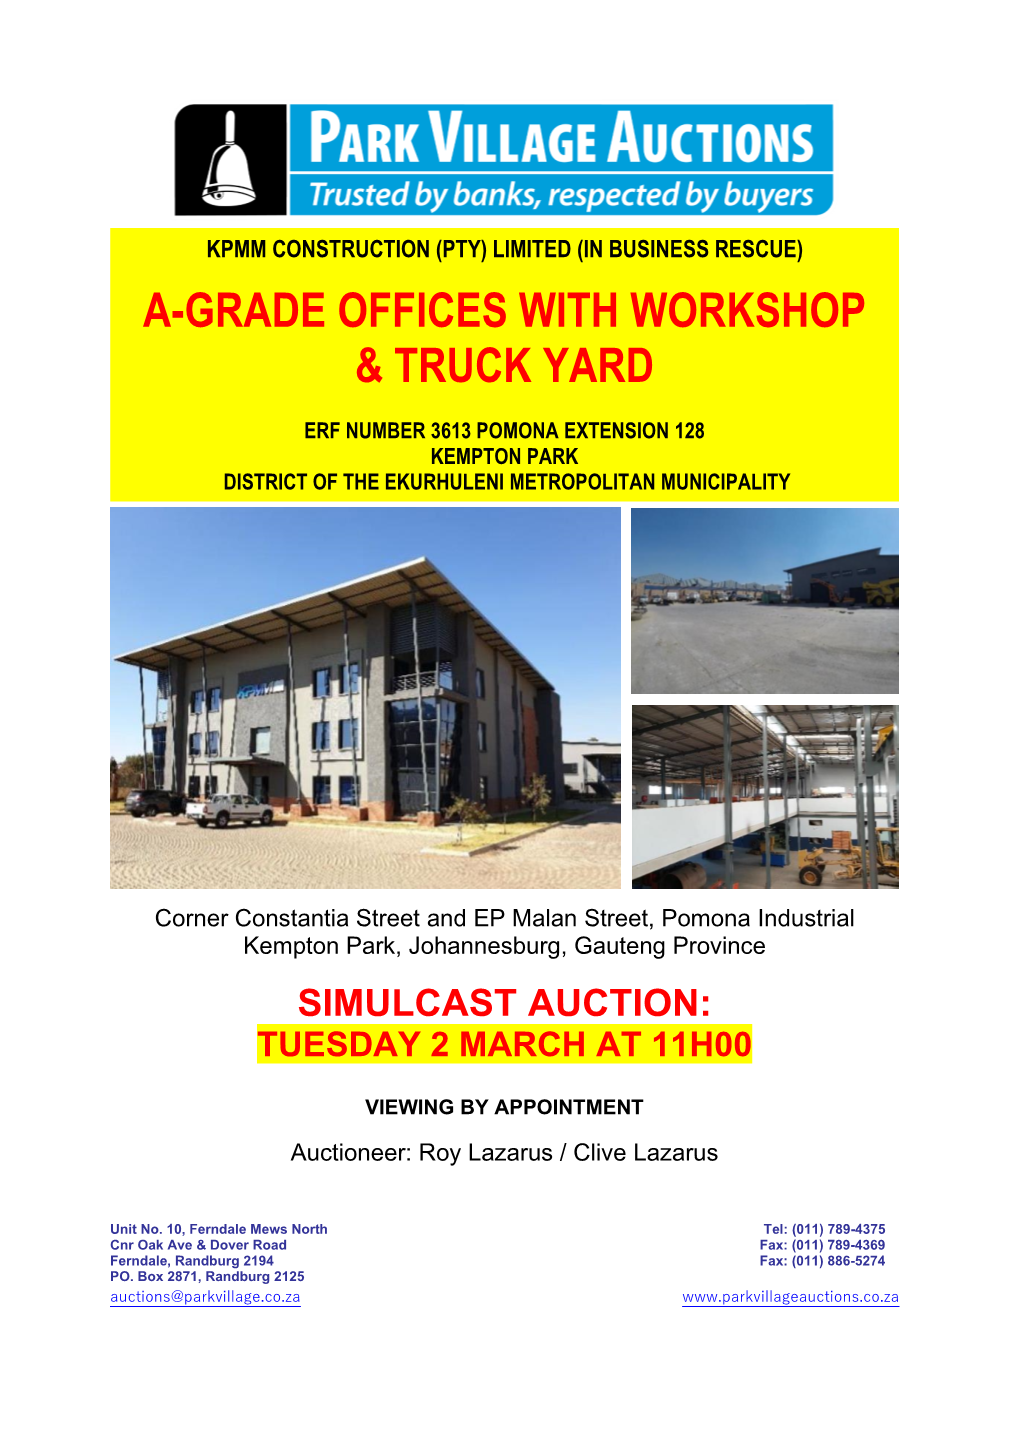 A-Grade Offices with Workshop & Truck Yard